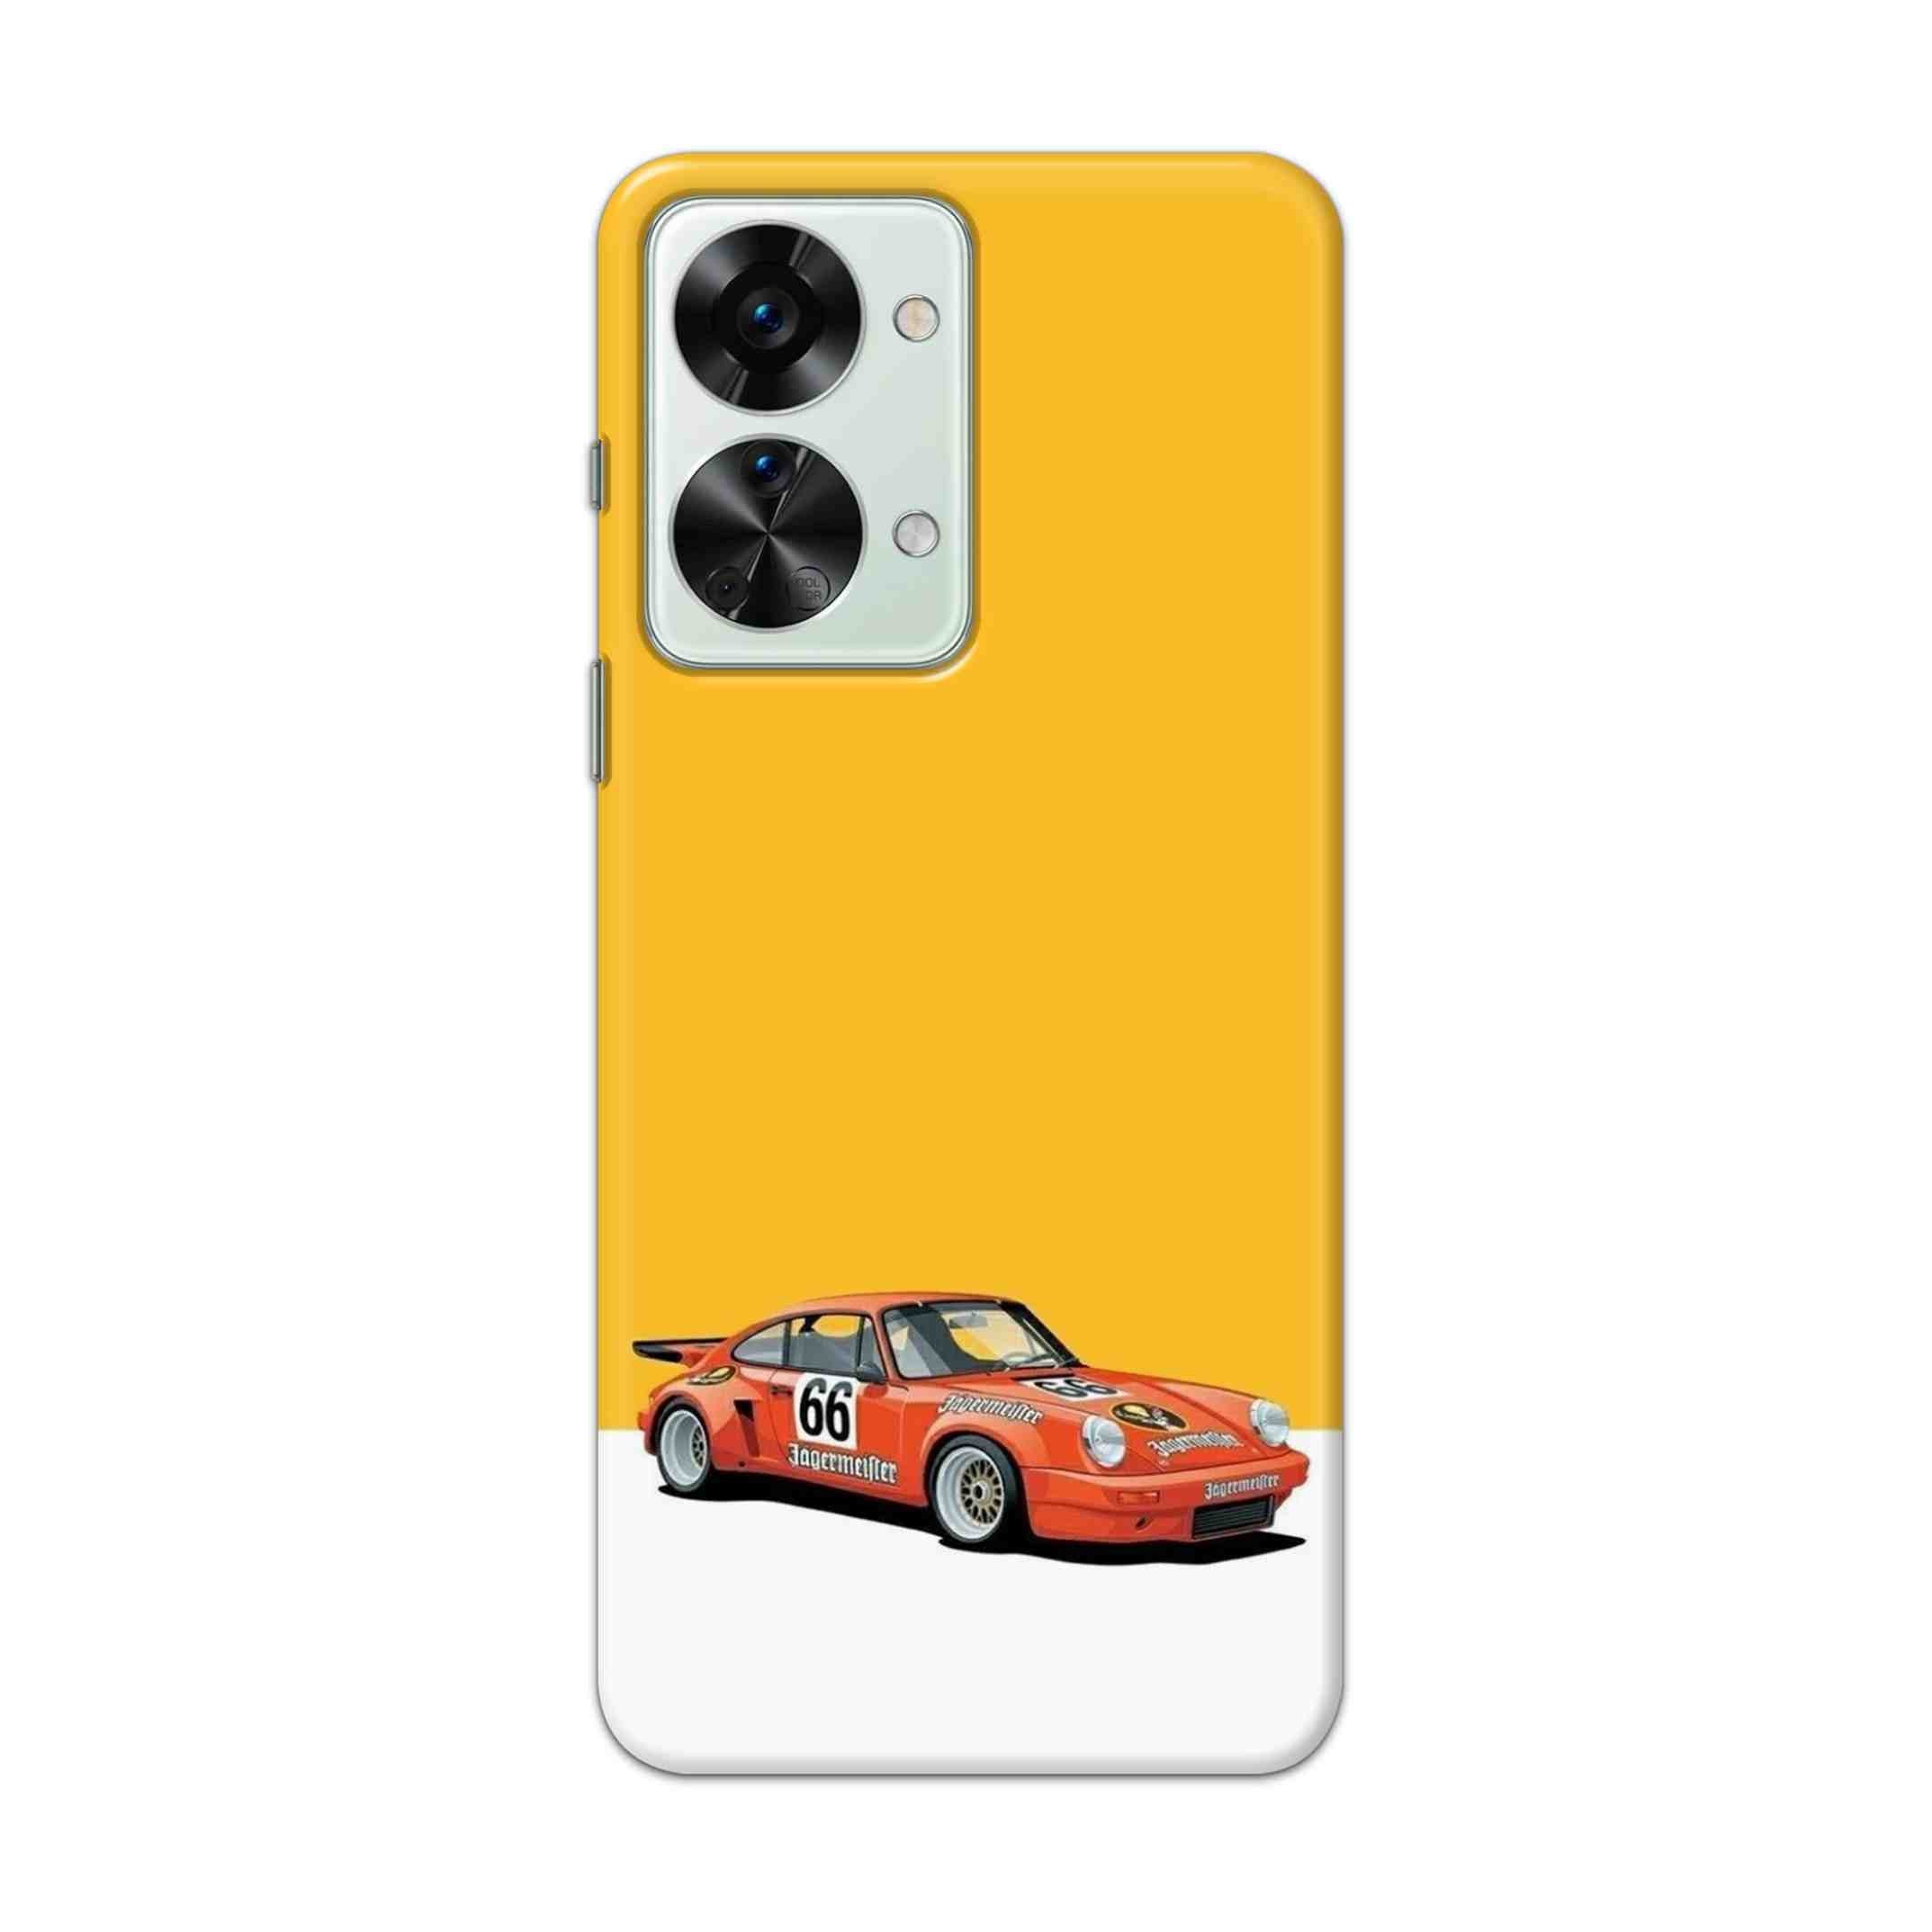 Buy Porche Hard Back Mobile Phone Case Cover For OnePlus Nord 2T 5G Online